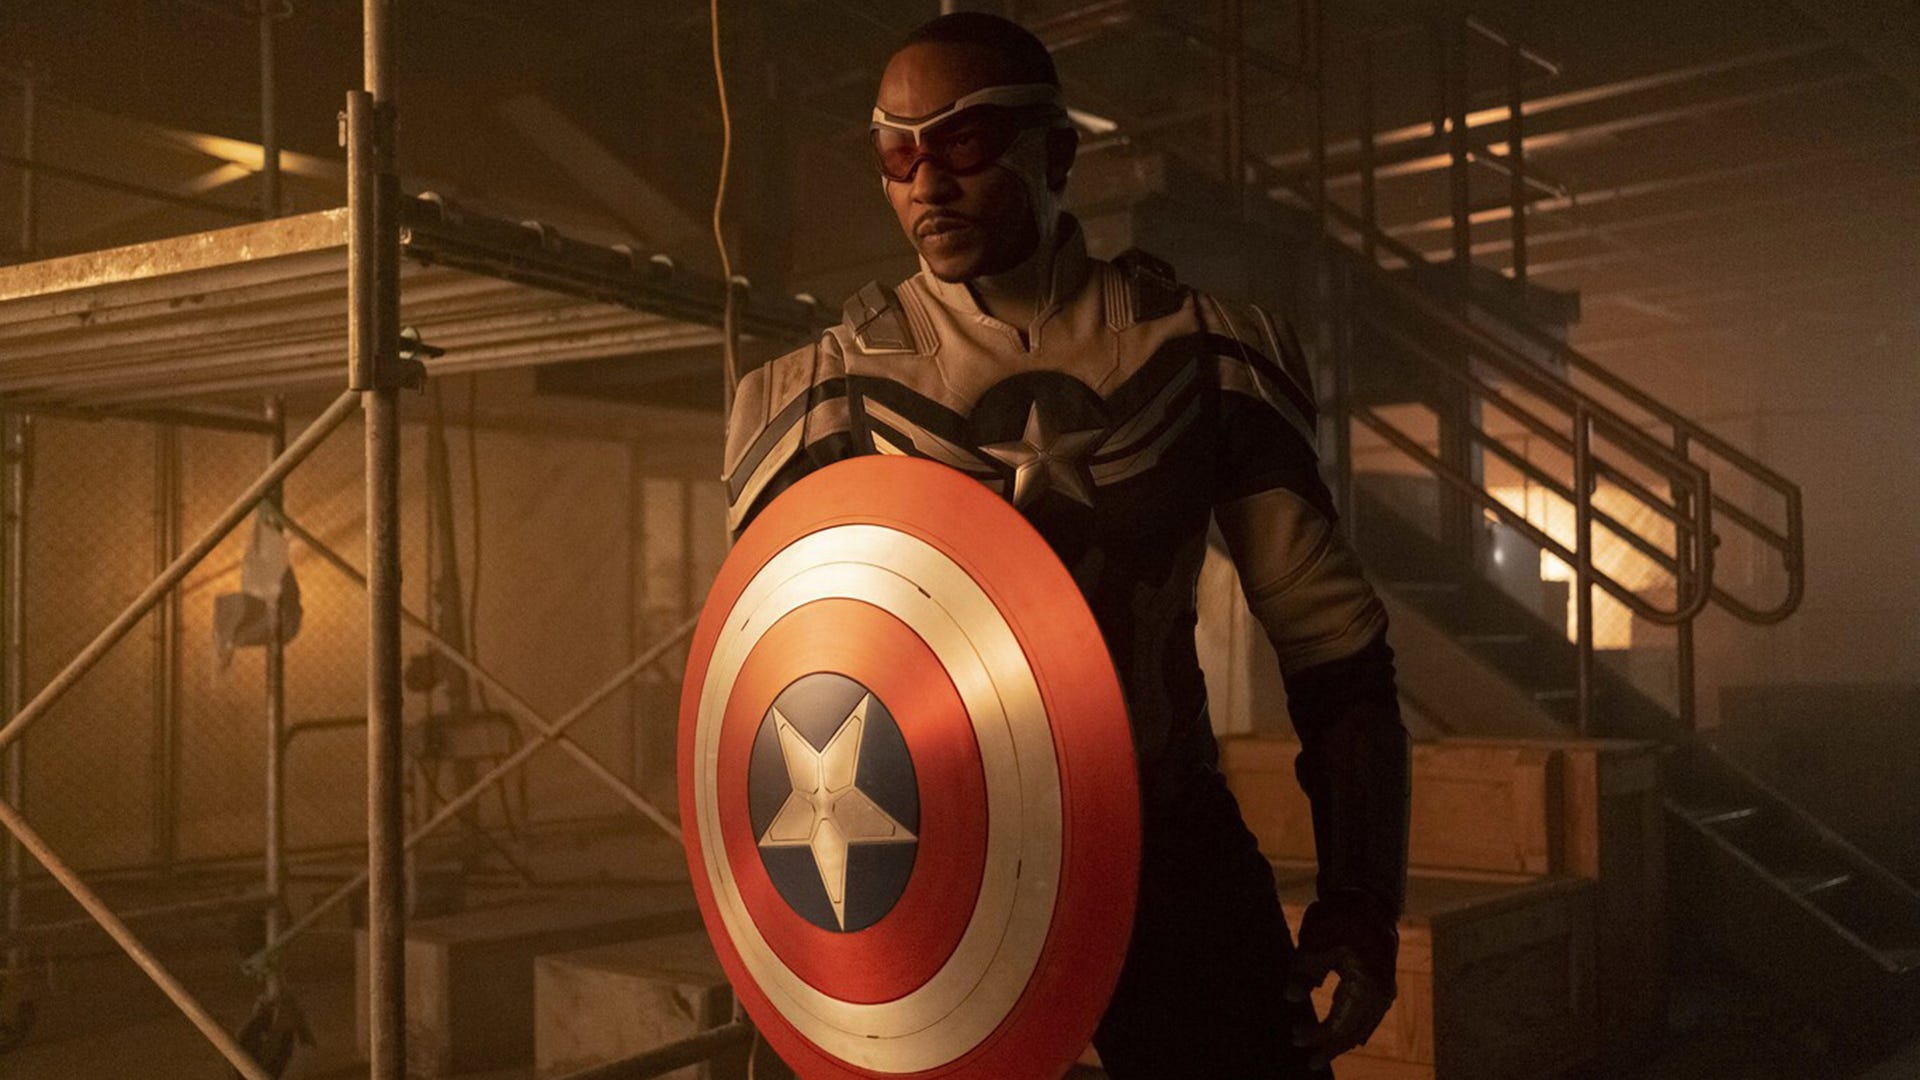 Anthony Mackie says the Marvel Cinematic Universe is limited by the source material, but we're not sure that's the problem